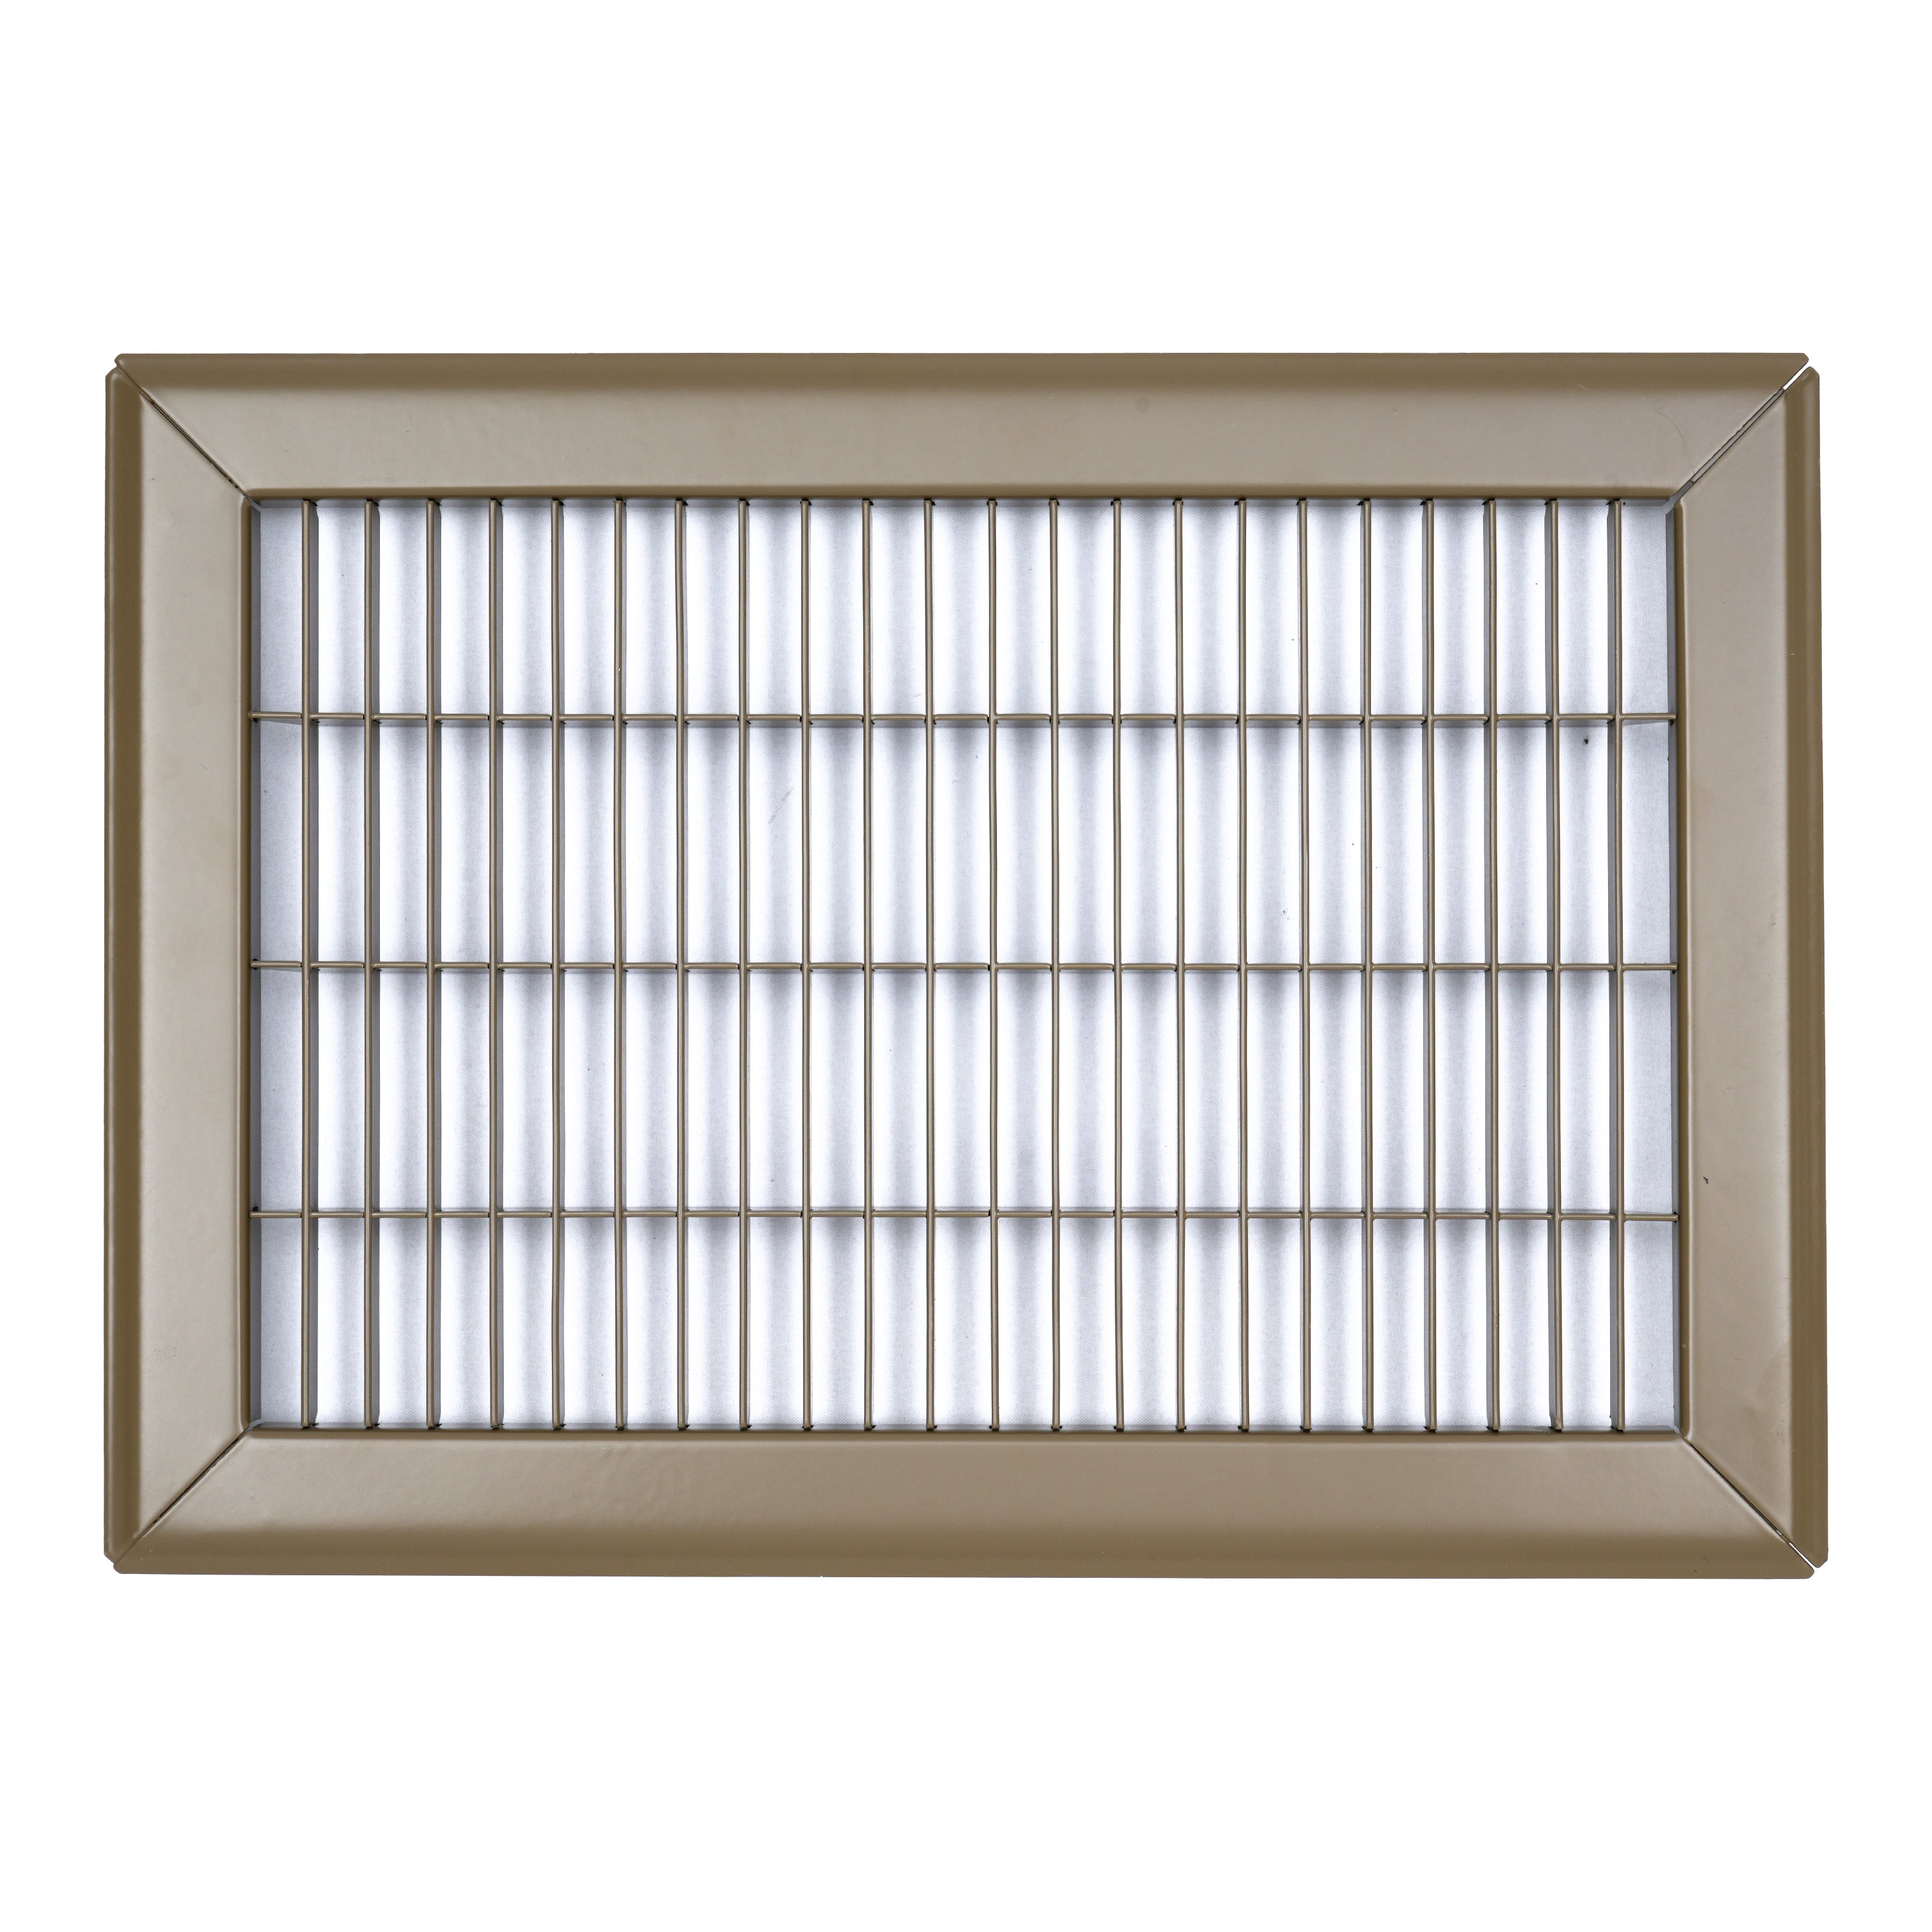 8"W x 12"H [Duct Opening] Return Air Floor Grille | Vent Cover Grill for Floor - Brown| Outer Dimensions: 9.75"W X 13.75"H